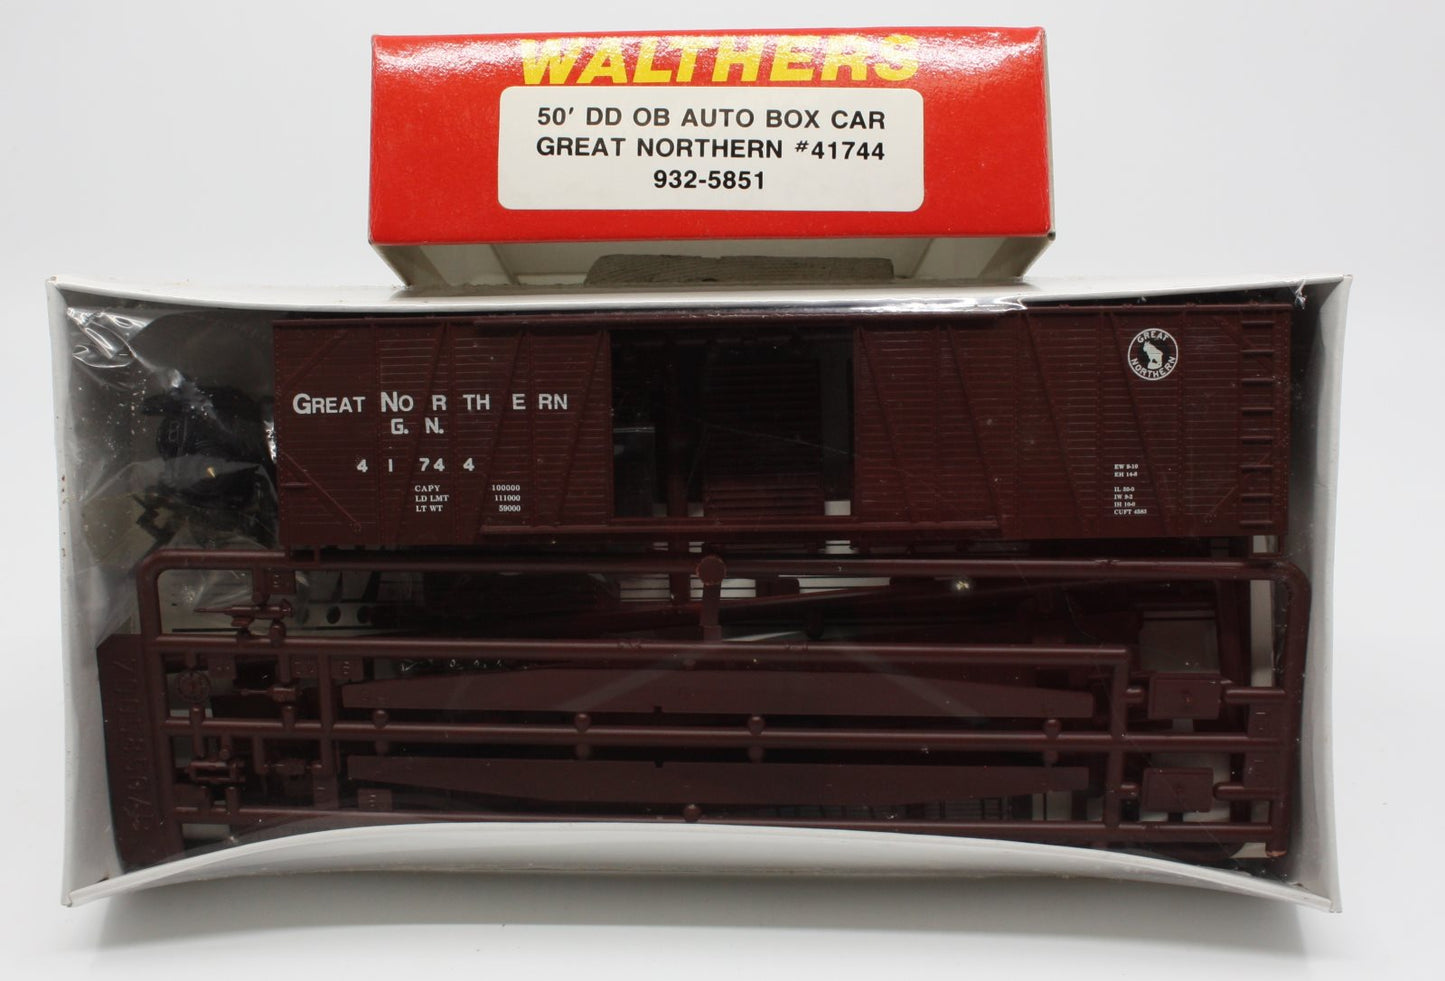 Walthers 932-5851 HO Great Northern 50' DD OB Auto Boxcar Kit #41744